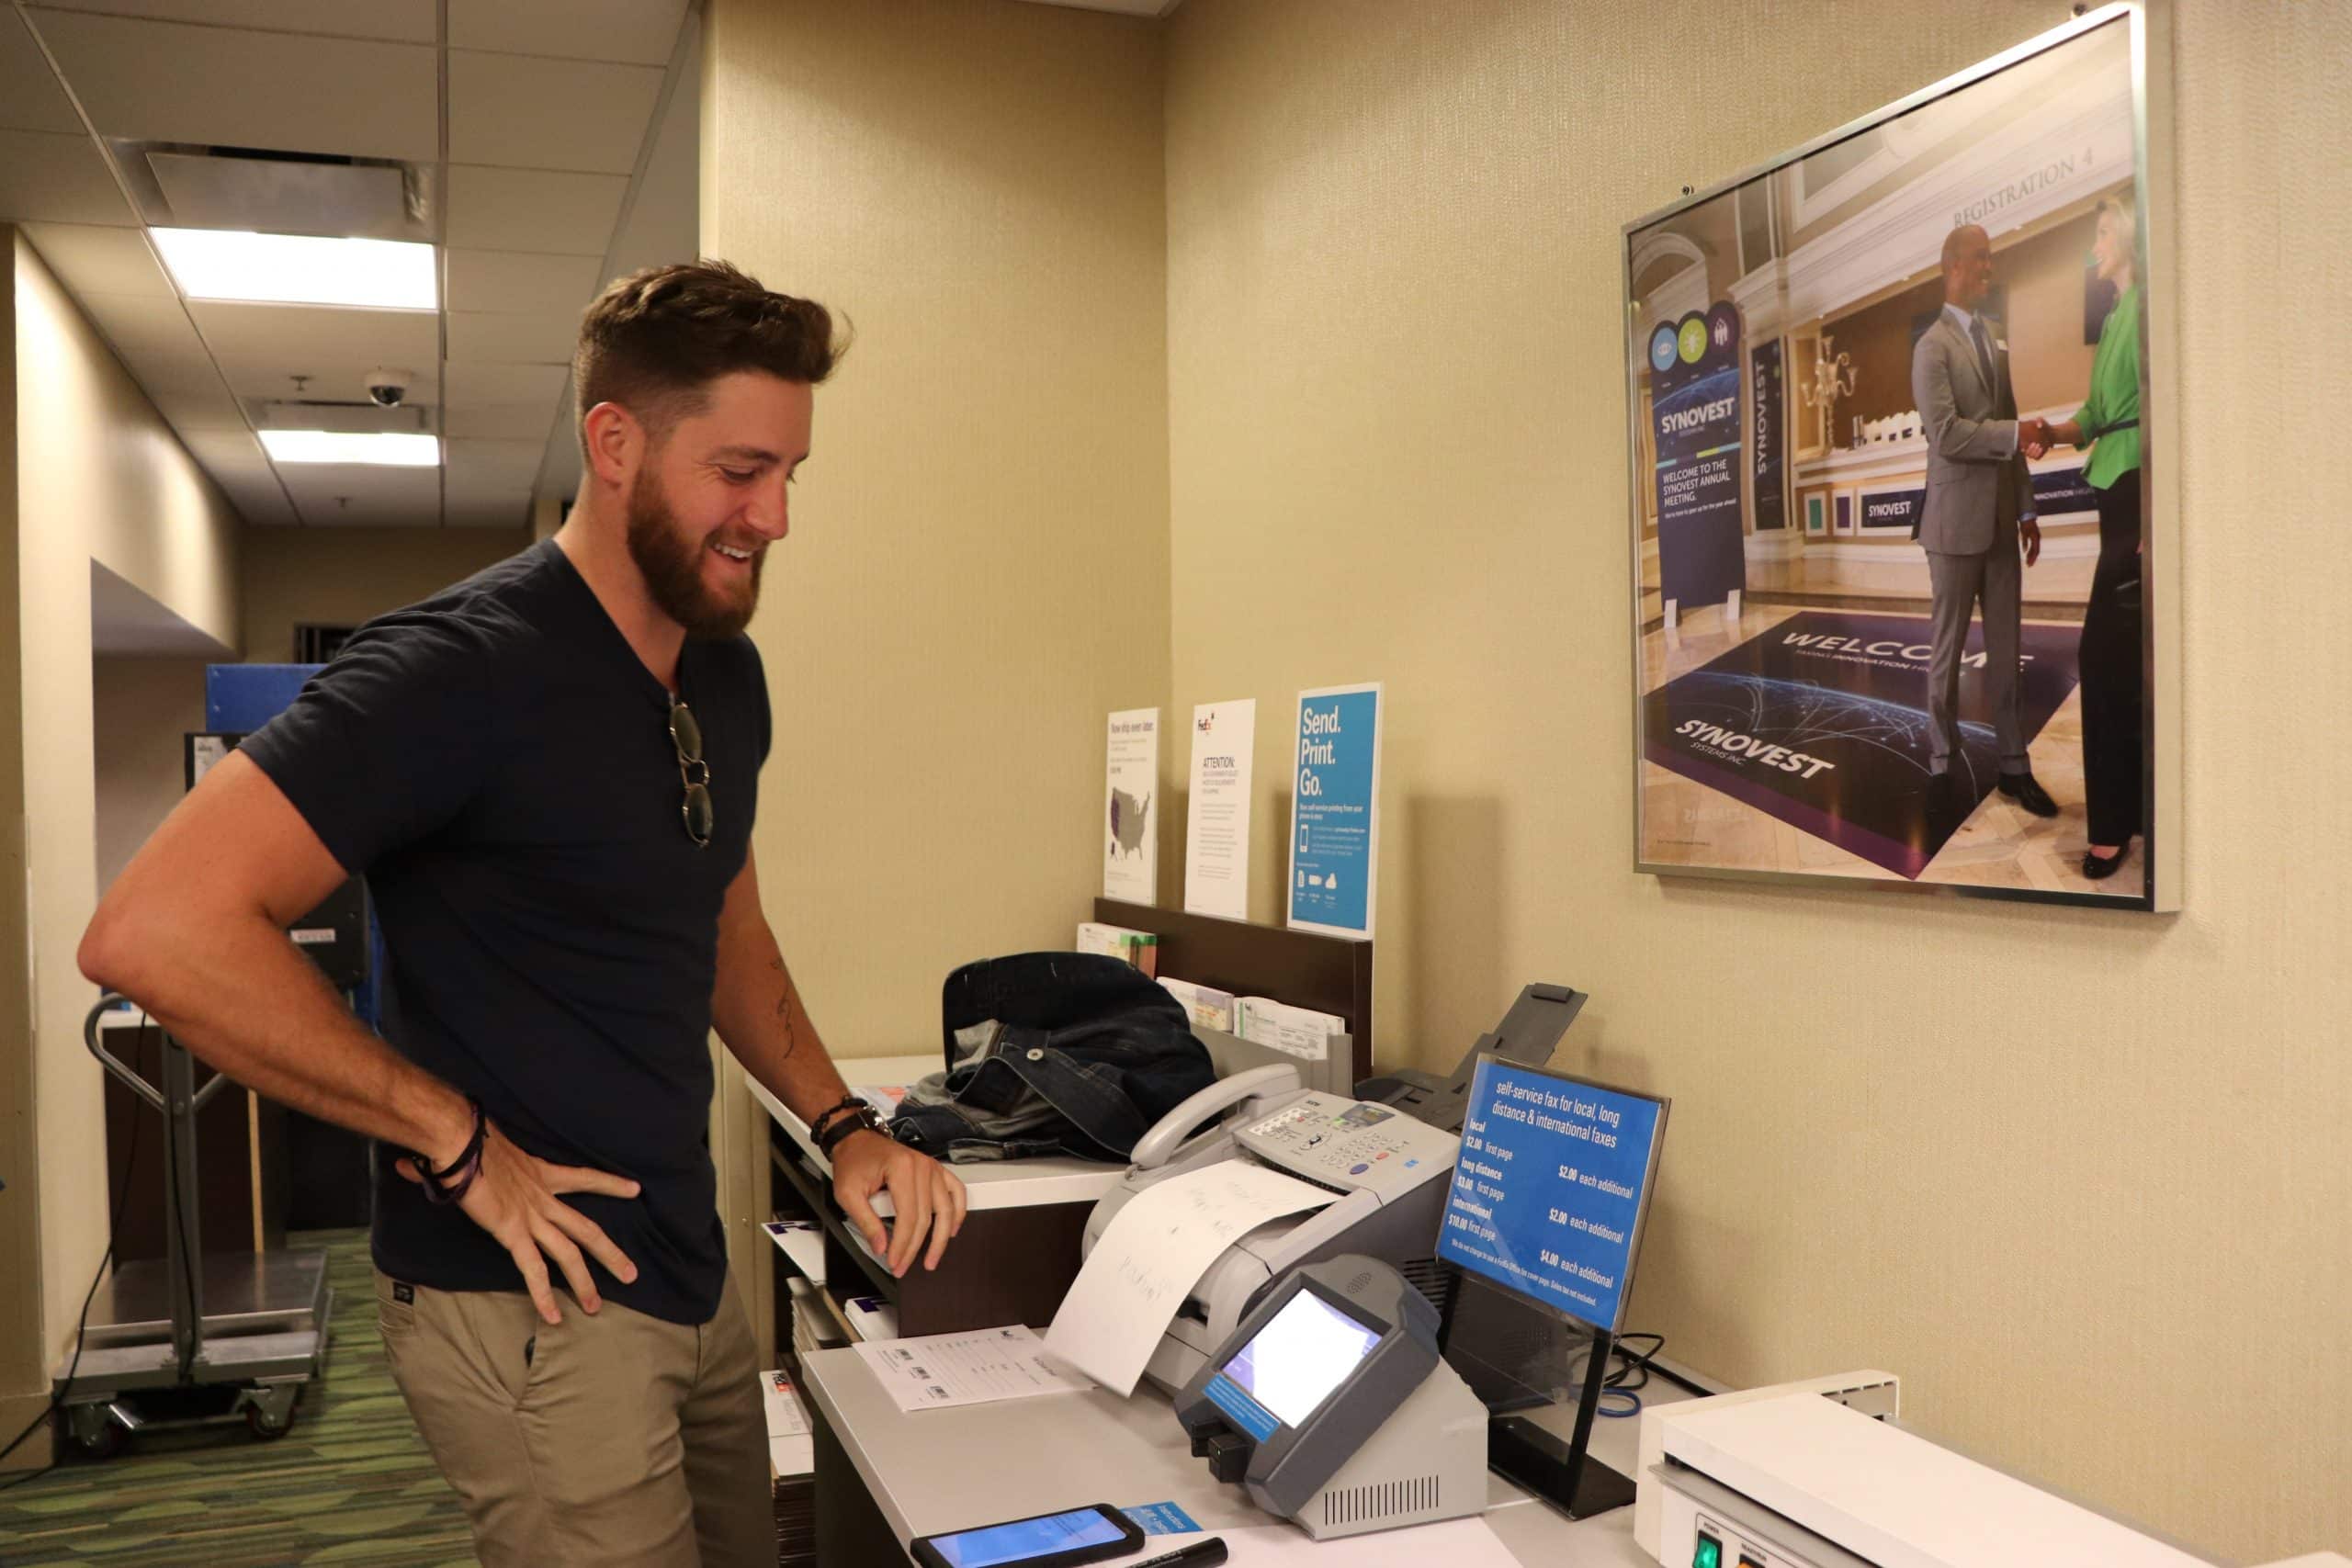 Paubox new hires: It's frustrating to send a fax